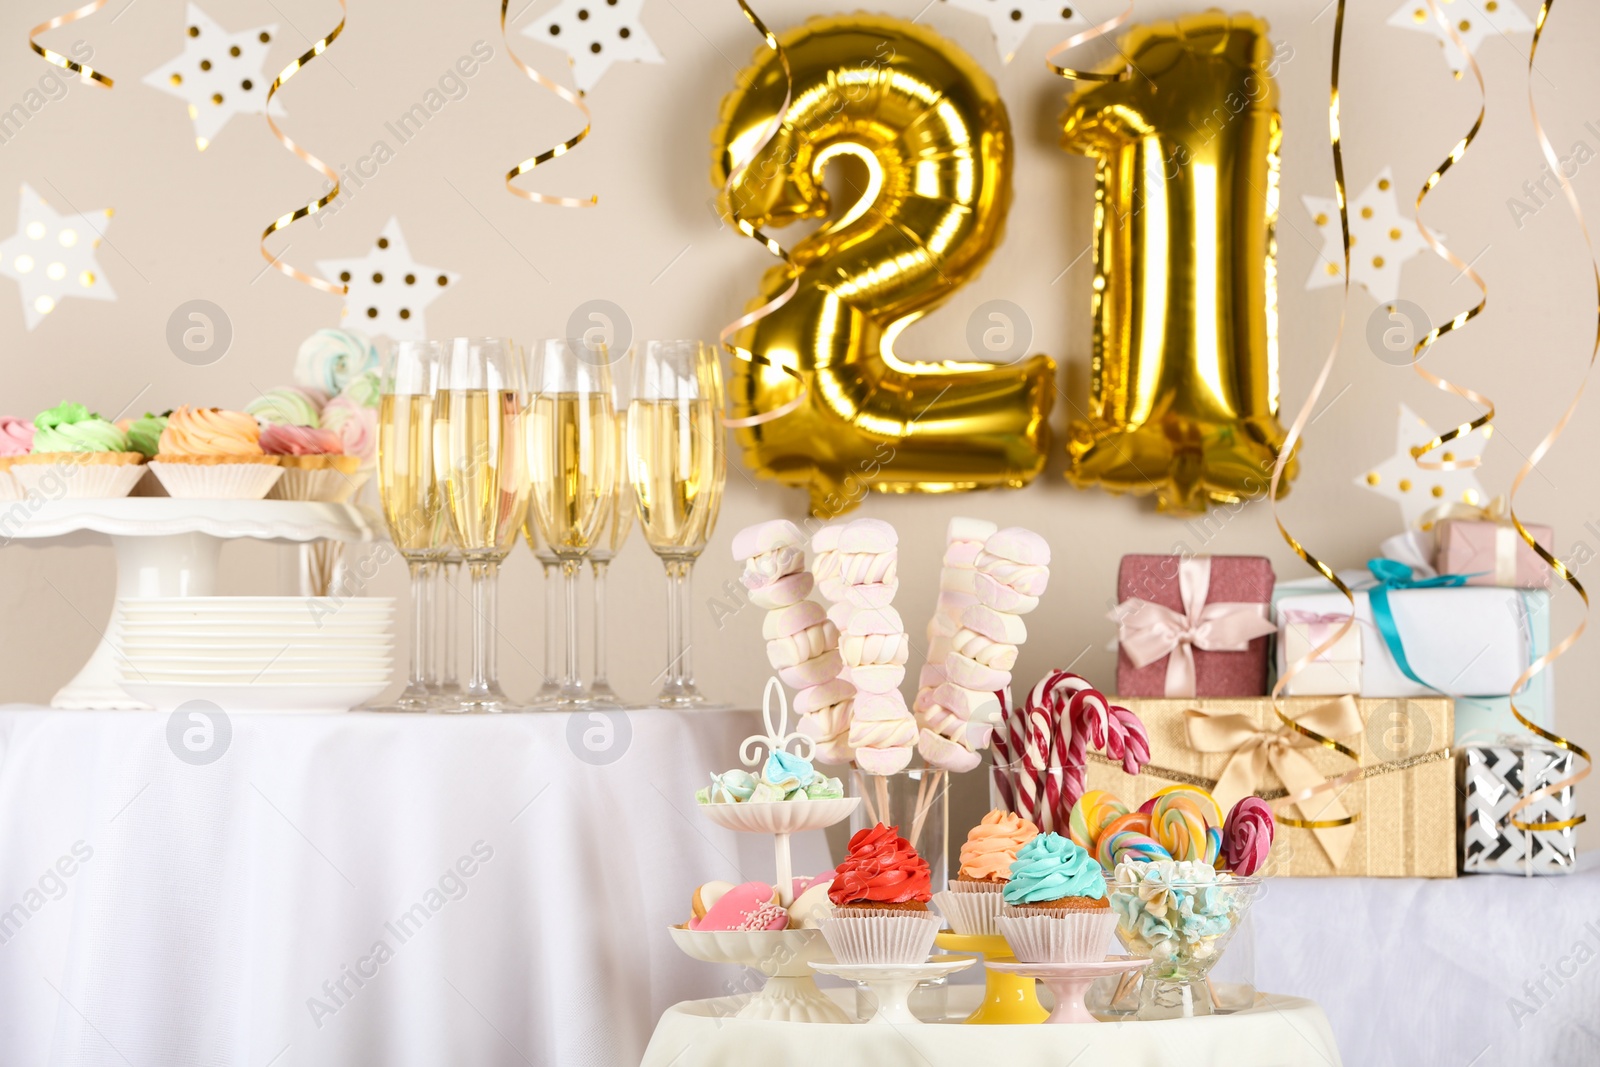 Photo of Dessert table in room decorated with golden balloons for 21 year birthday party